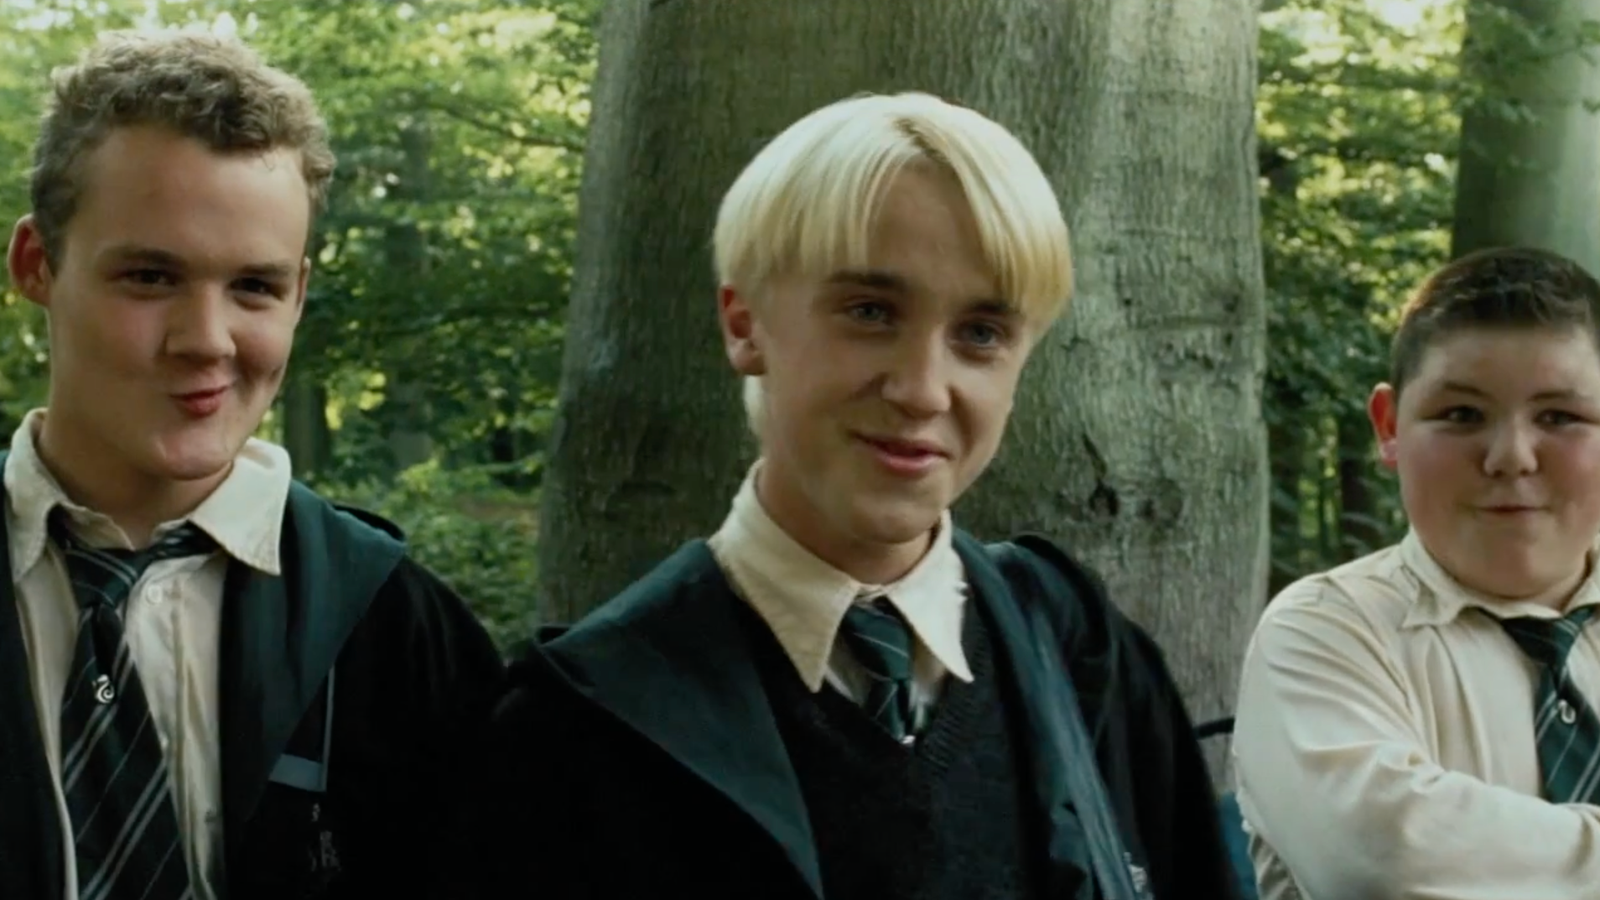 Argument: Actually, Slytherins are good